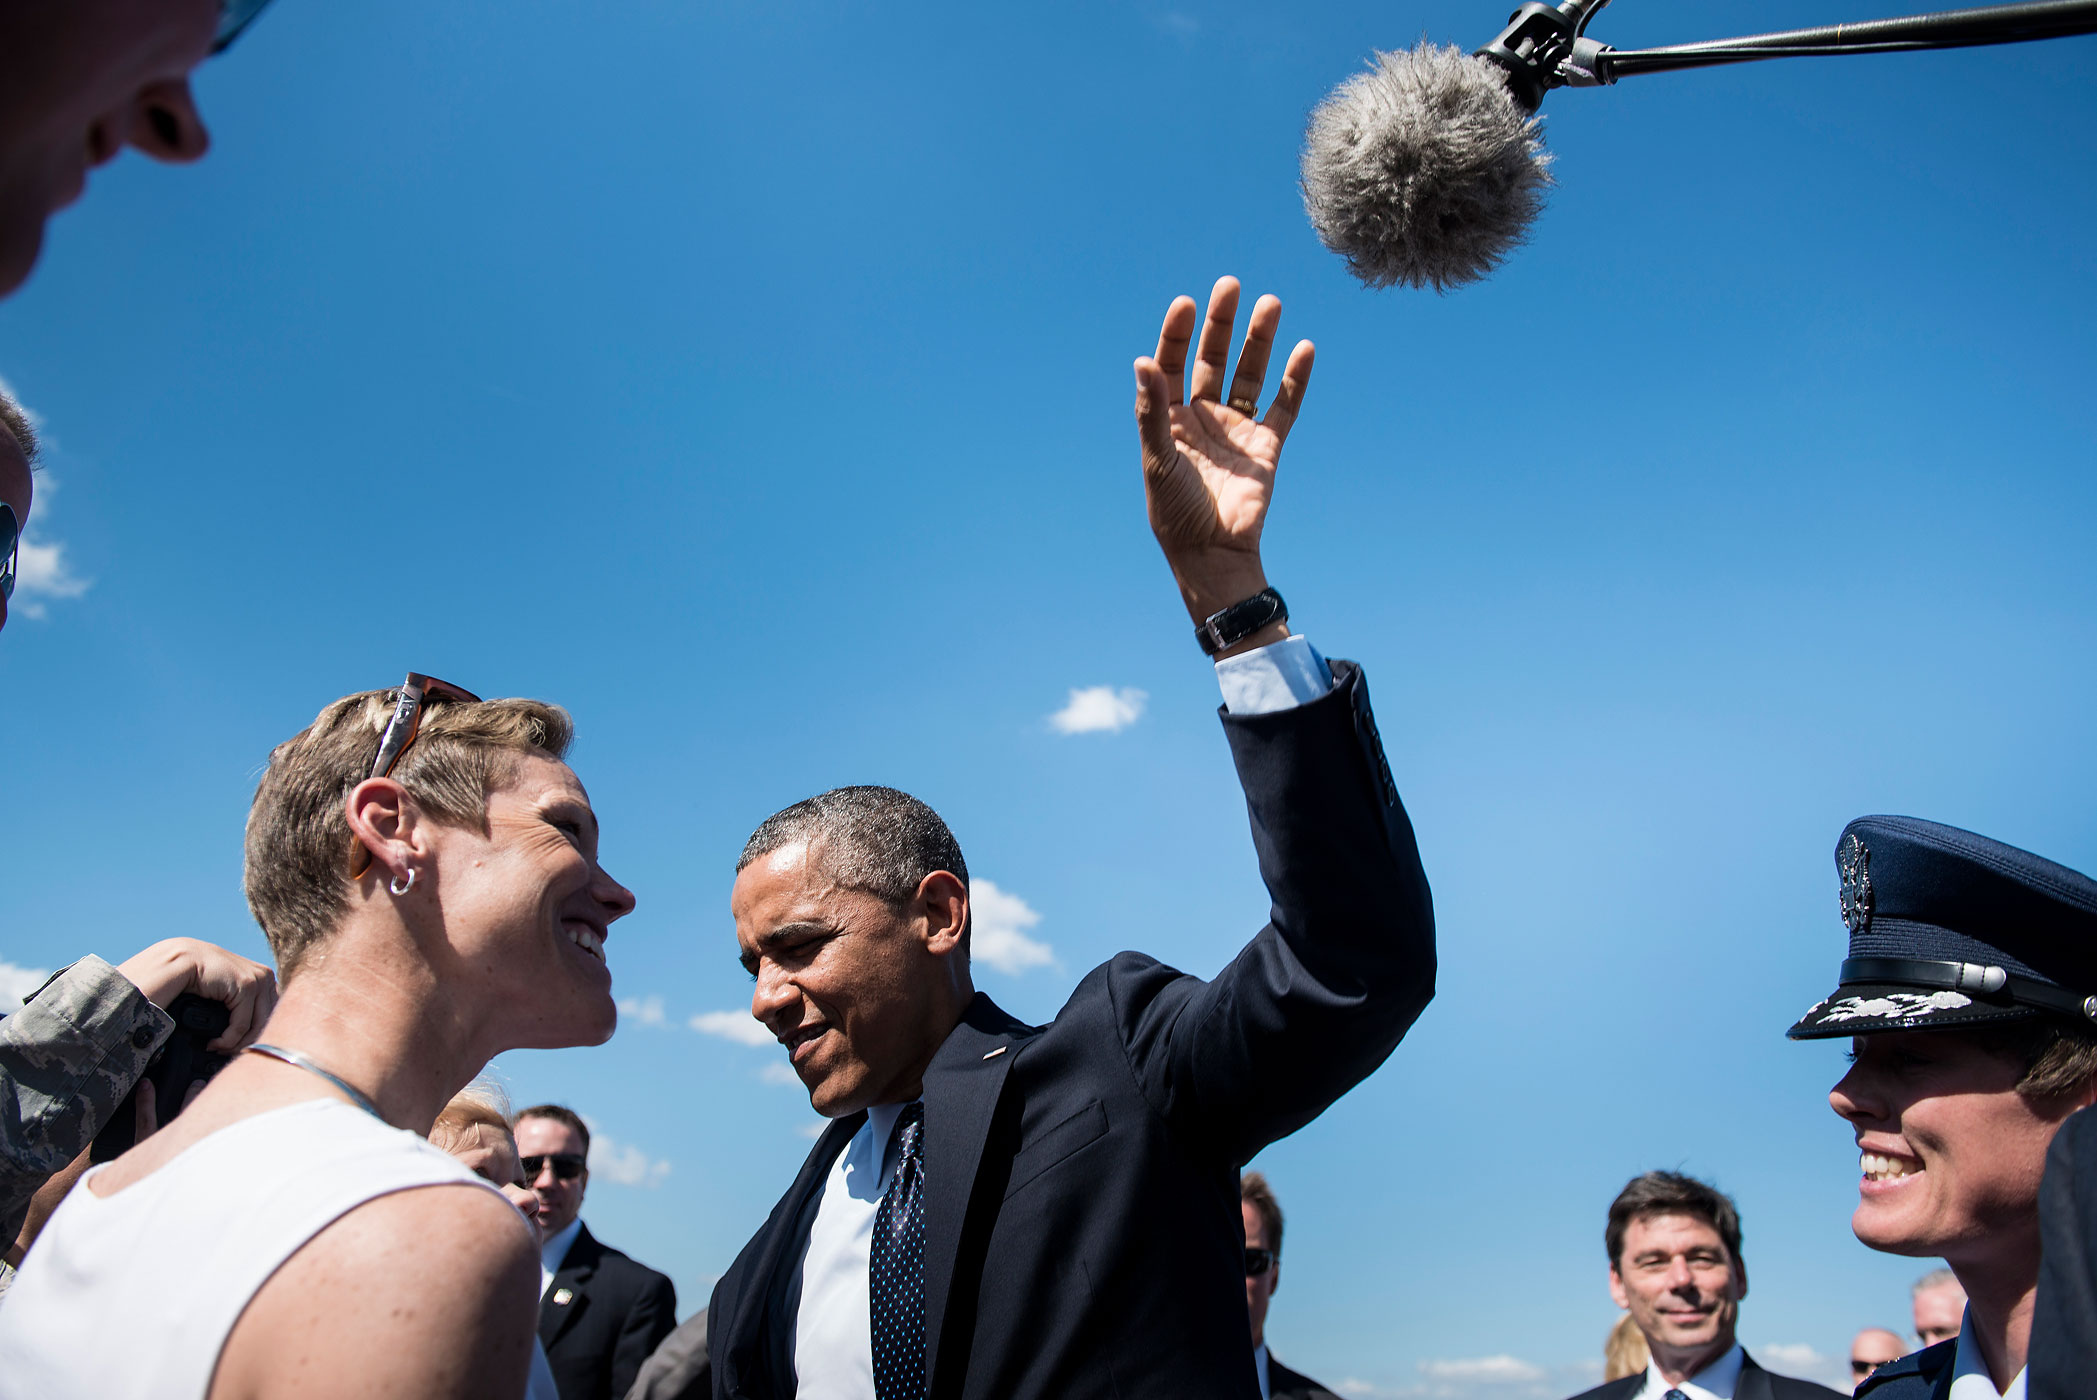 July 24, 2013. President Barack Obama reaches for a boom microphone while joking with a baby in a crowd of greeters at Whiteman Air Force Base in Missouri.